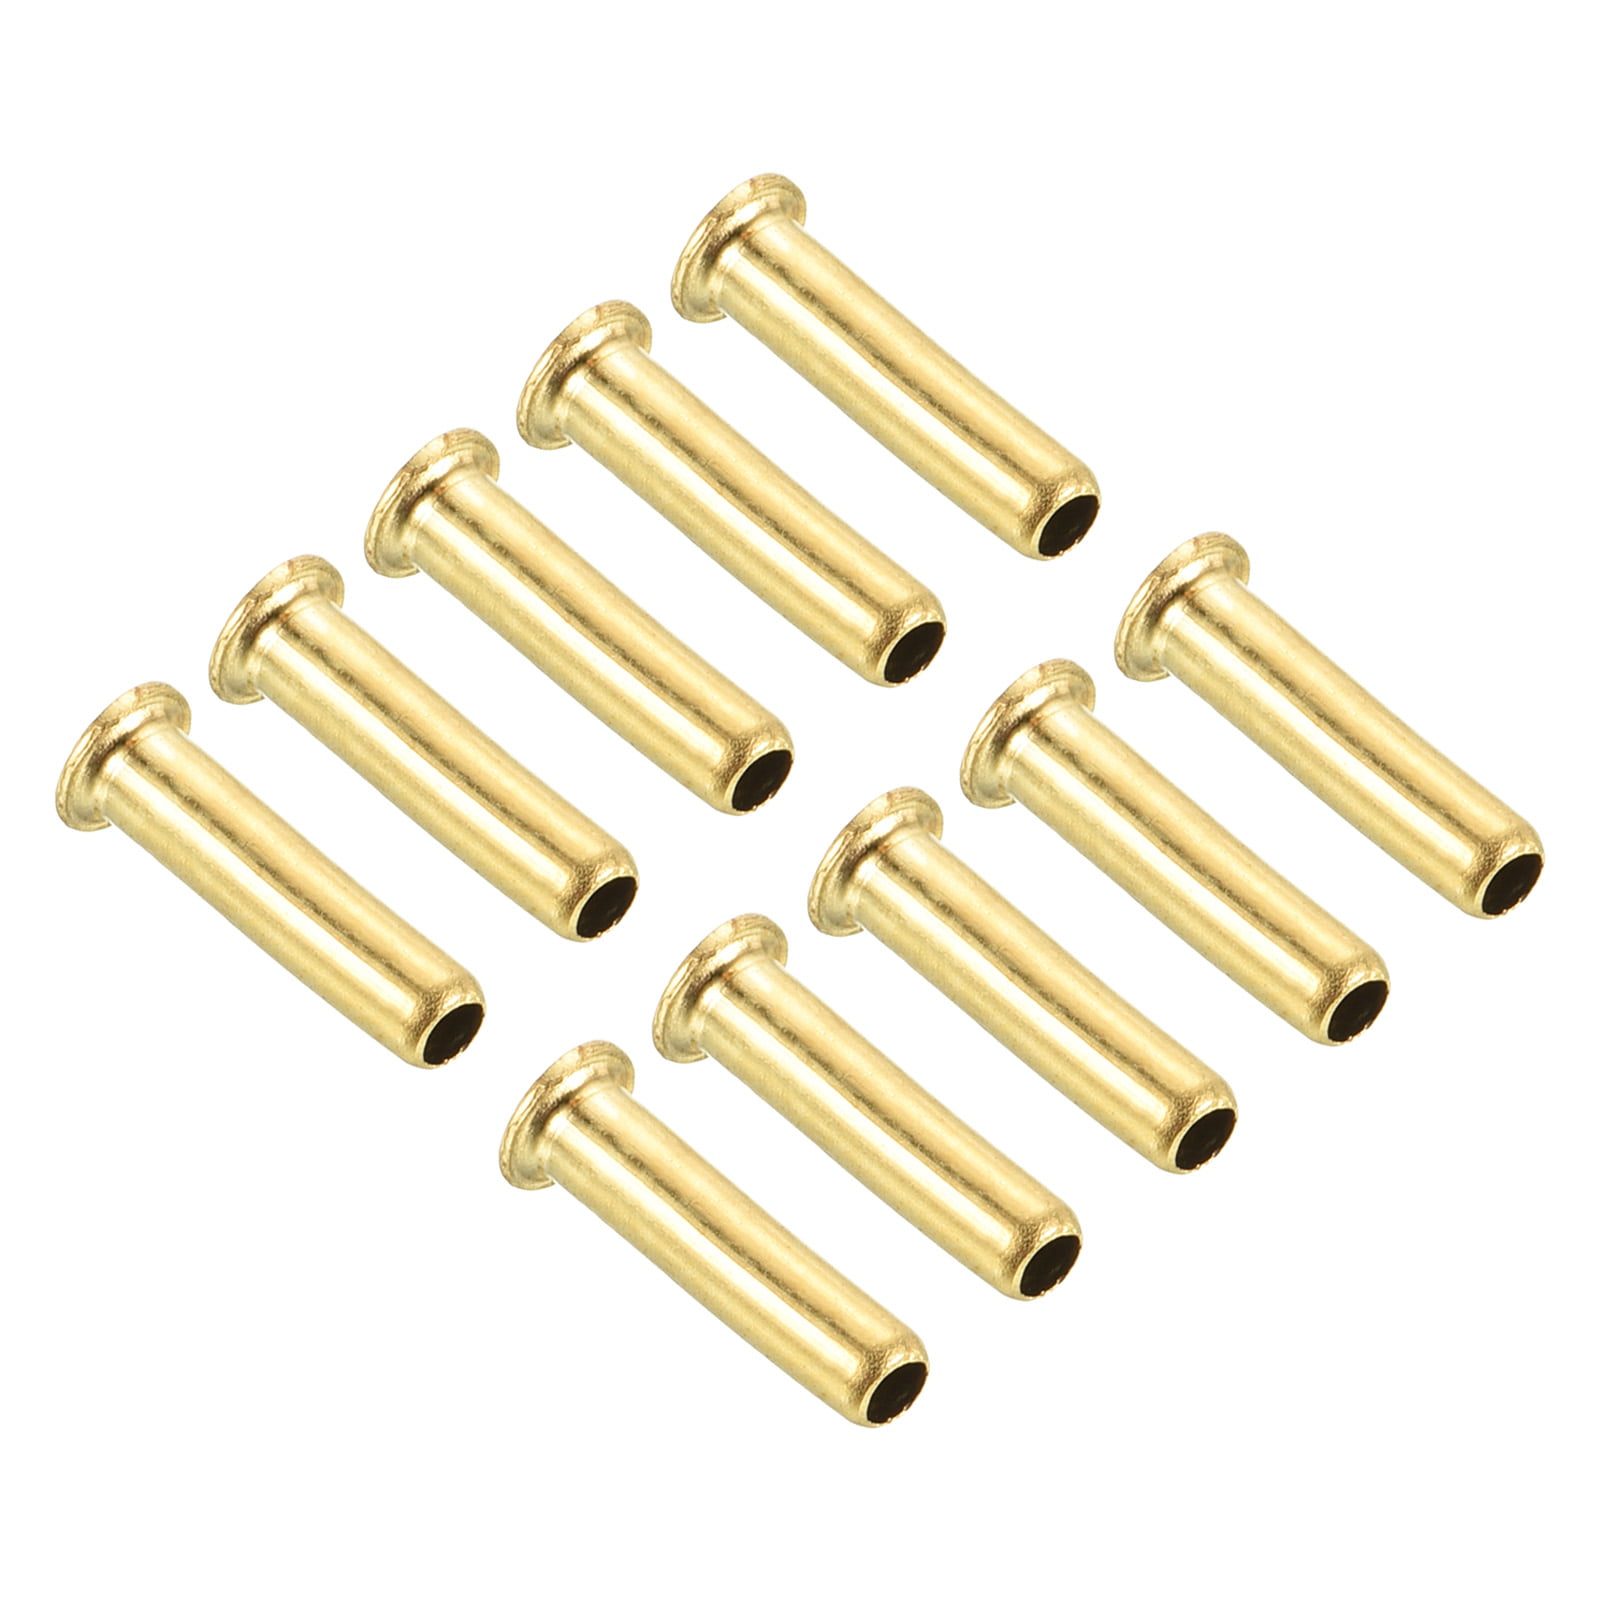 Uxcell 2.5mm Tube Brass Compression Fittings, 15 Pack Insert